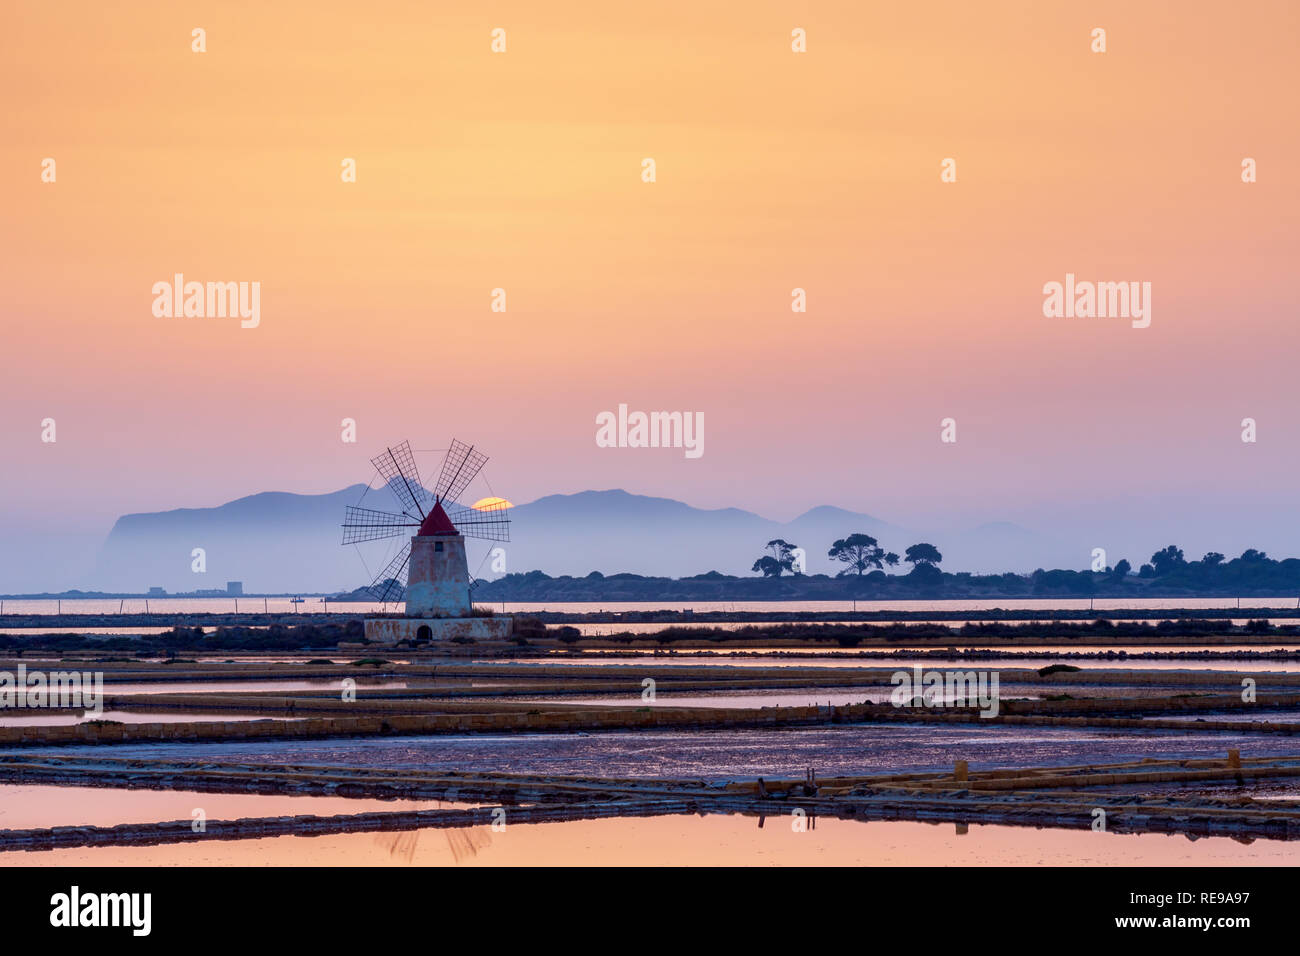 Sunset at the old salt works in the Laguna dello Stagnone near Trapani, Sicily, Italy Stock Photo